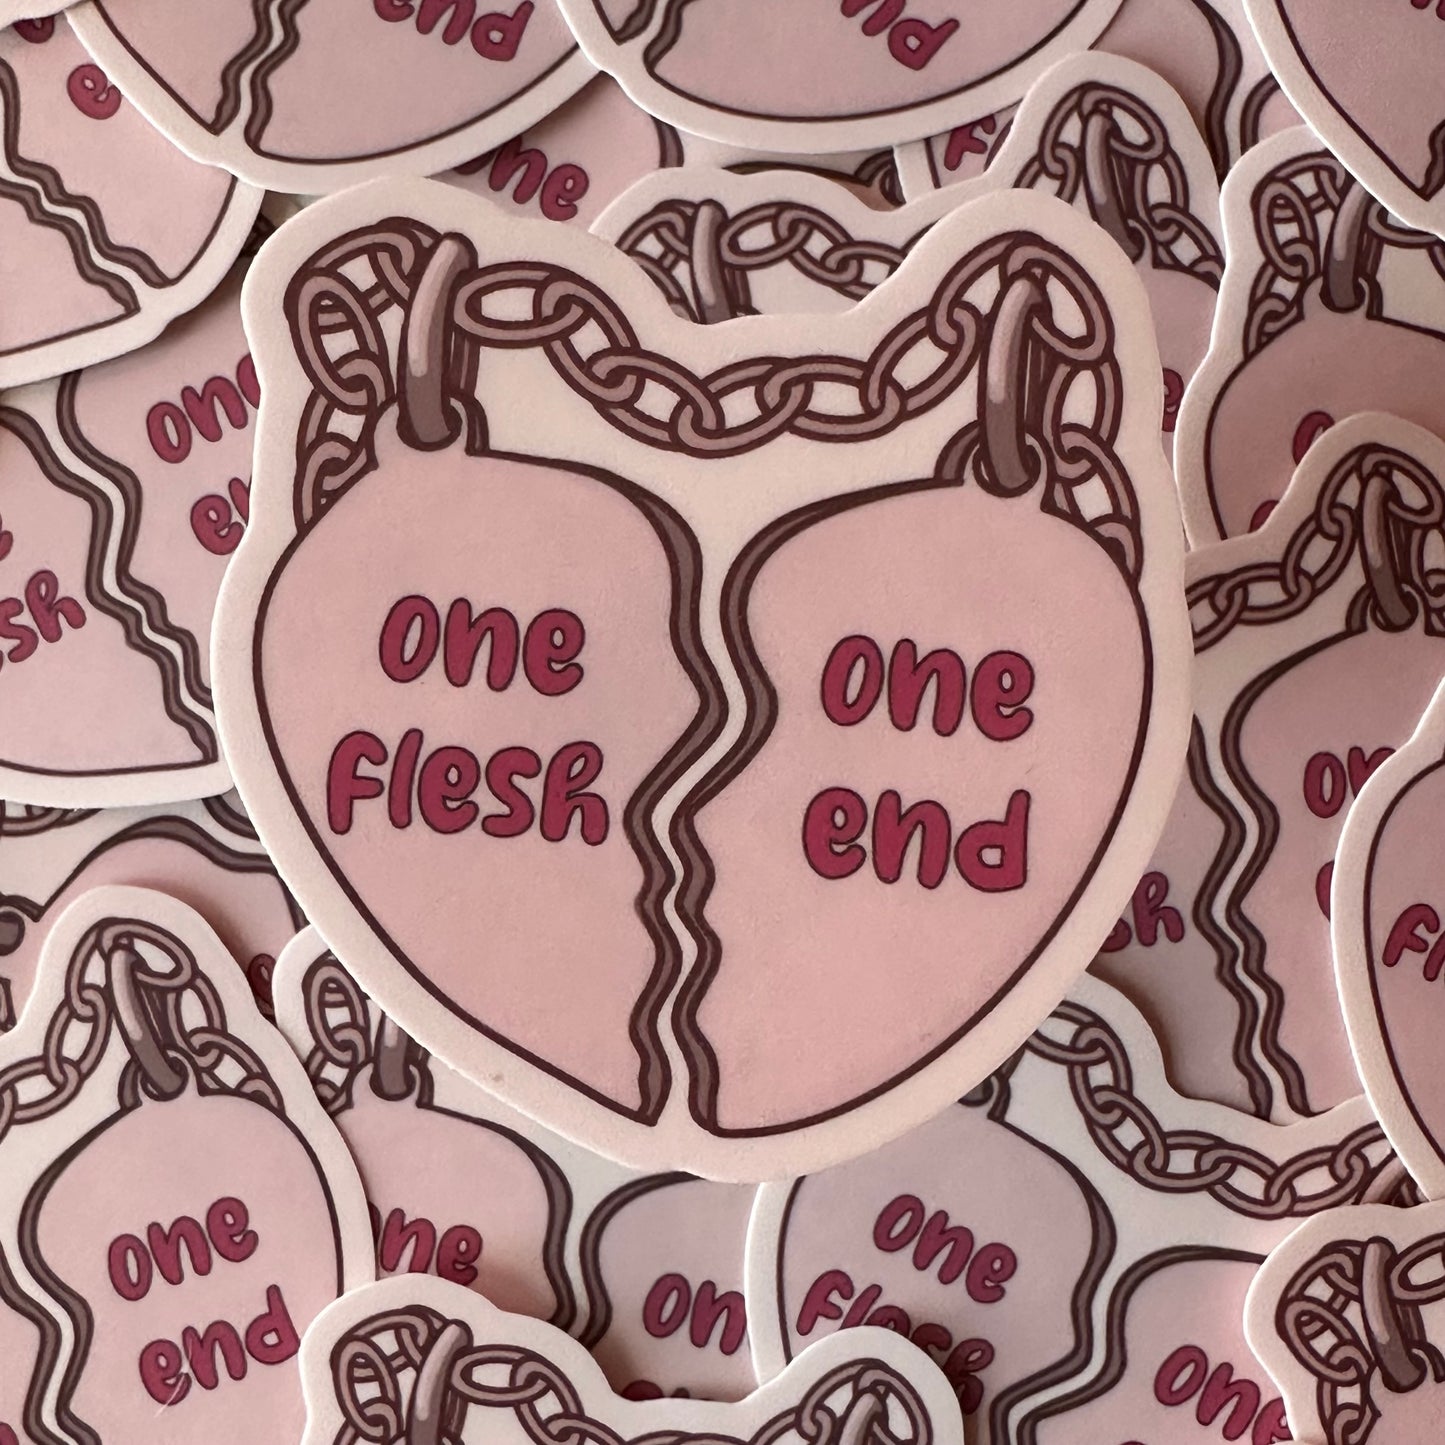 A sticker of a pair of friendship charms in the shape of a broken heart connected by a chain. The left heart has the words "one flesh" on it and the right charm has "one end" on it. 